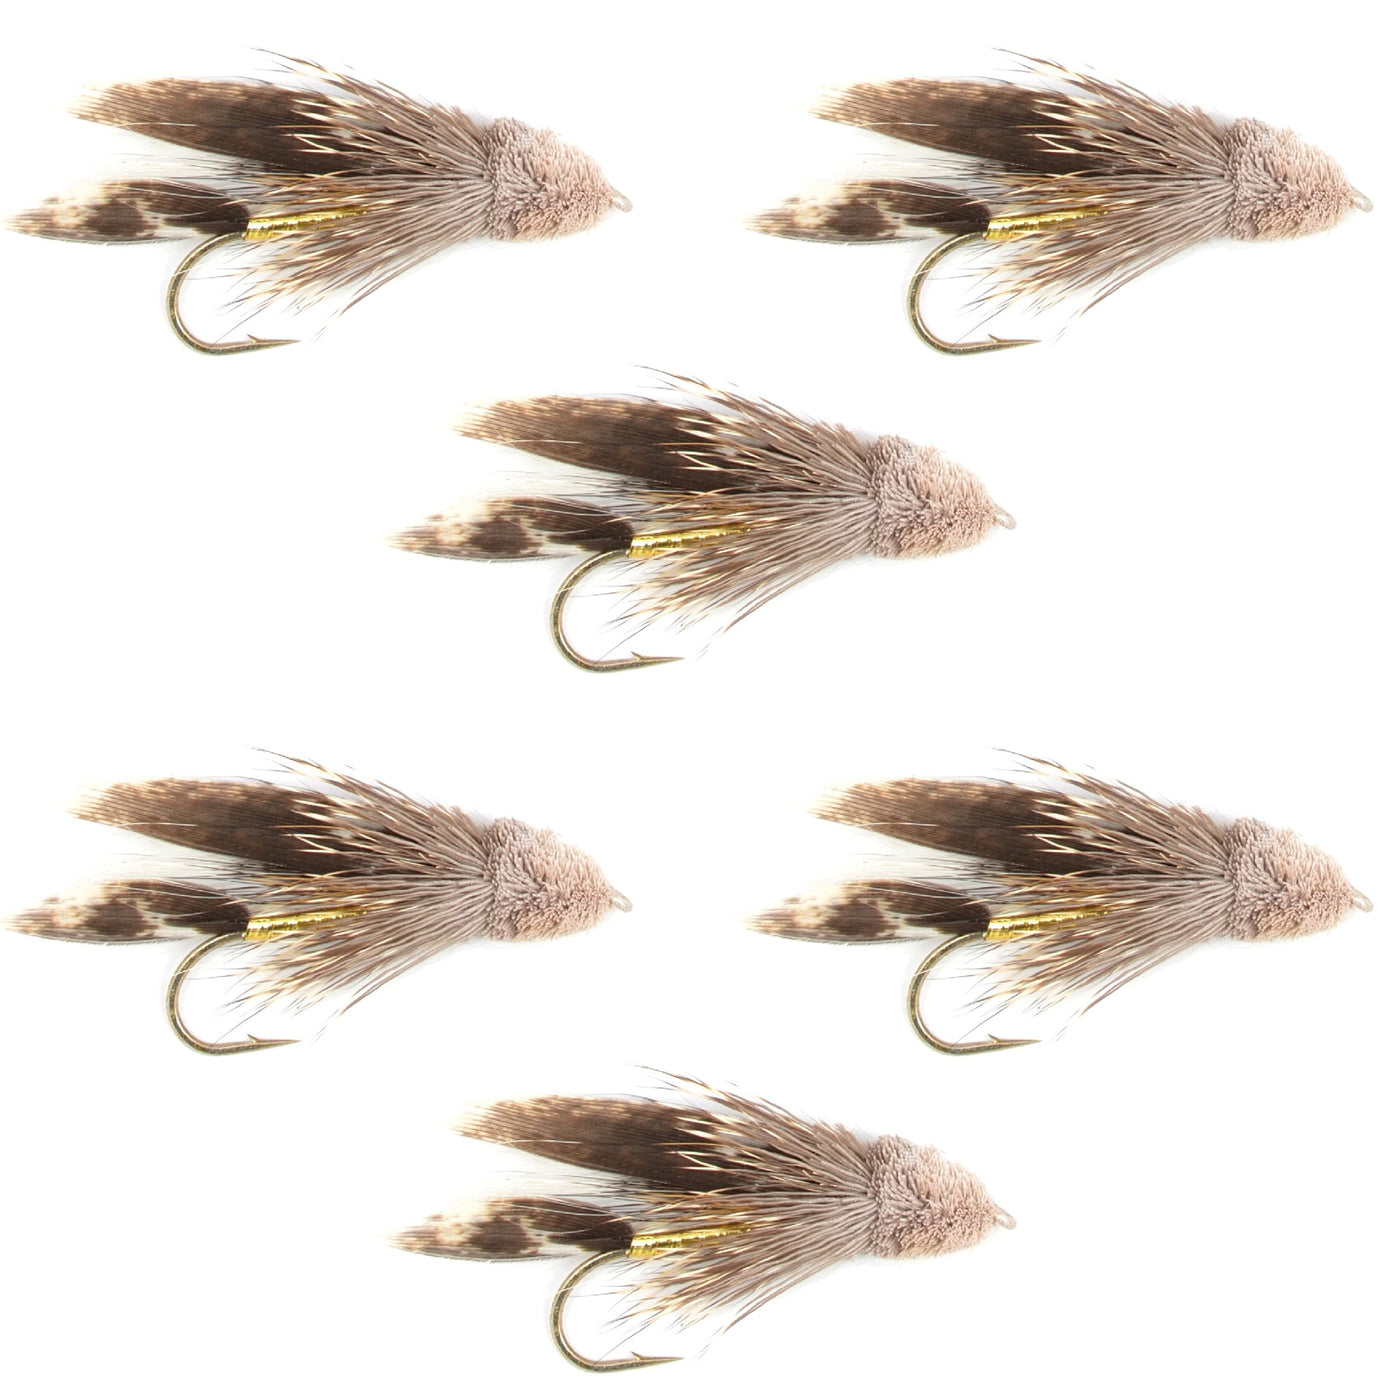 Muddler Minnow Fly Fishing Flies - Classic Bass and Trout Streamers - Set of 6 Flies Hook Size 6